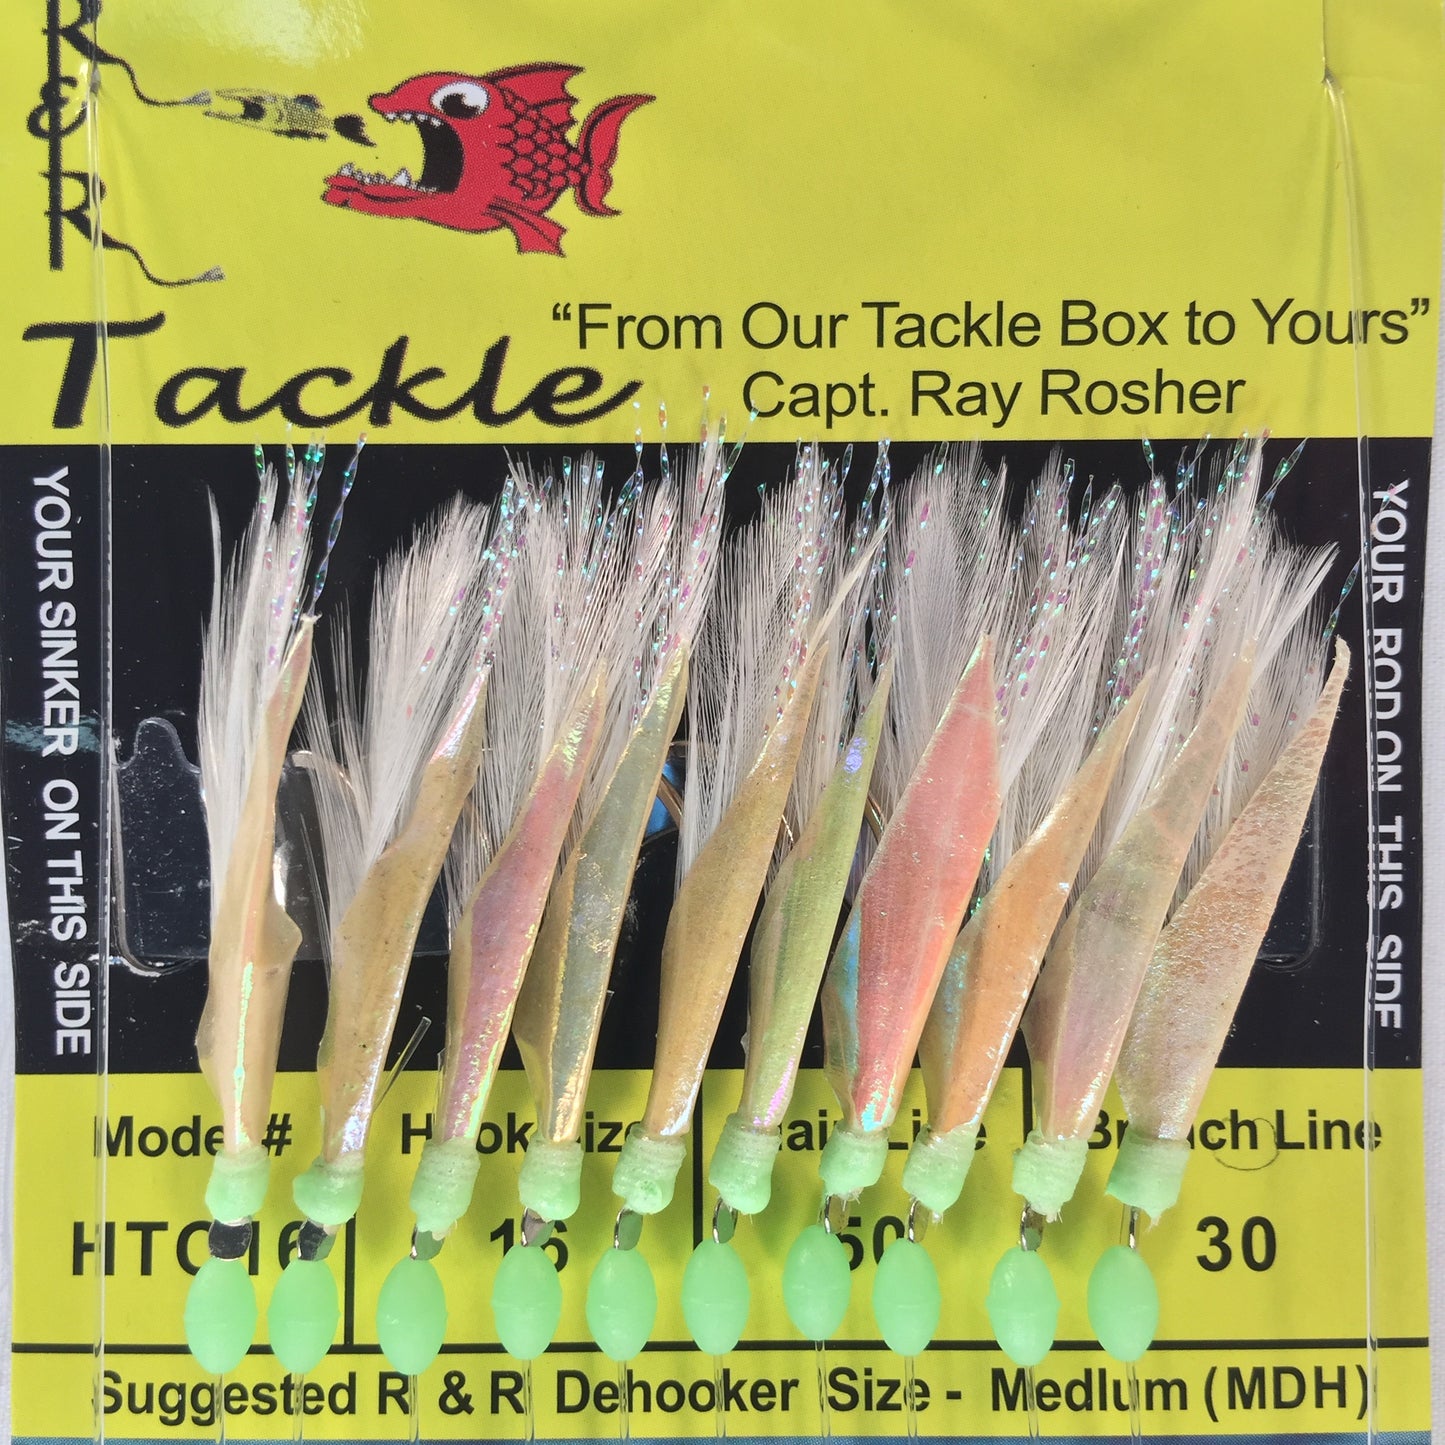 HTC16 Bait Rig - 10 (size 16) hooks with white feather & fish skin